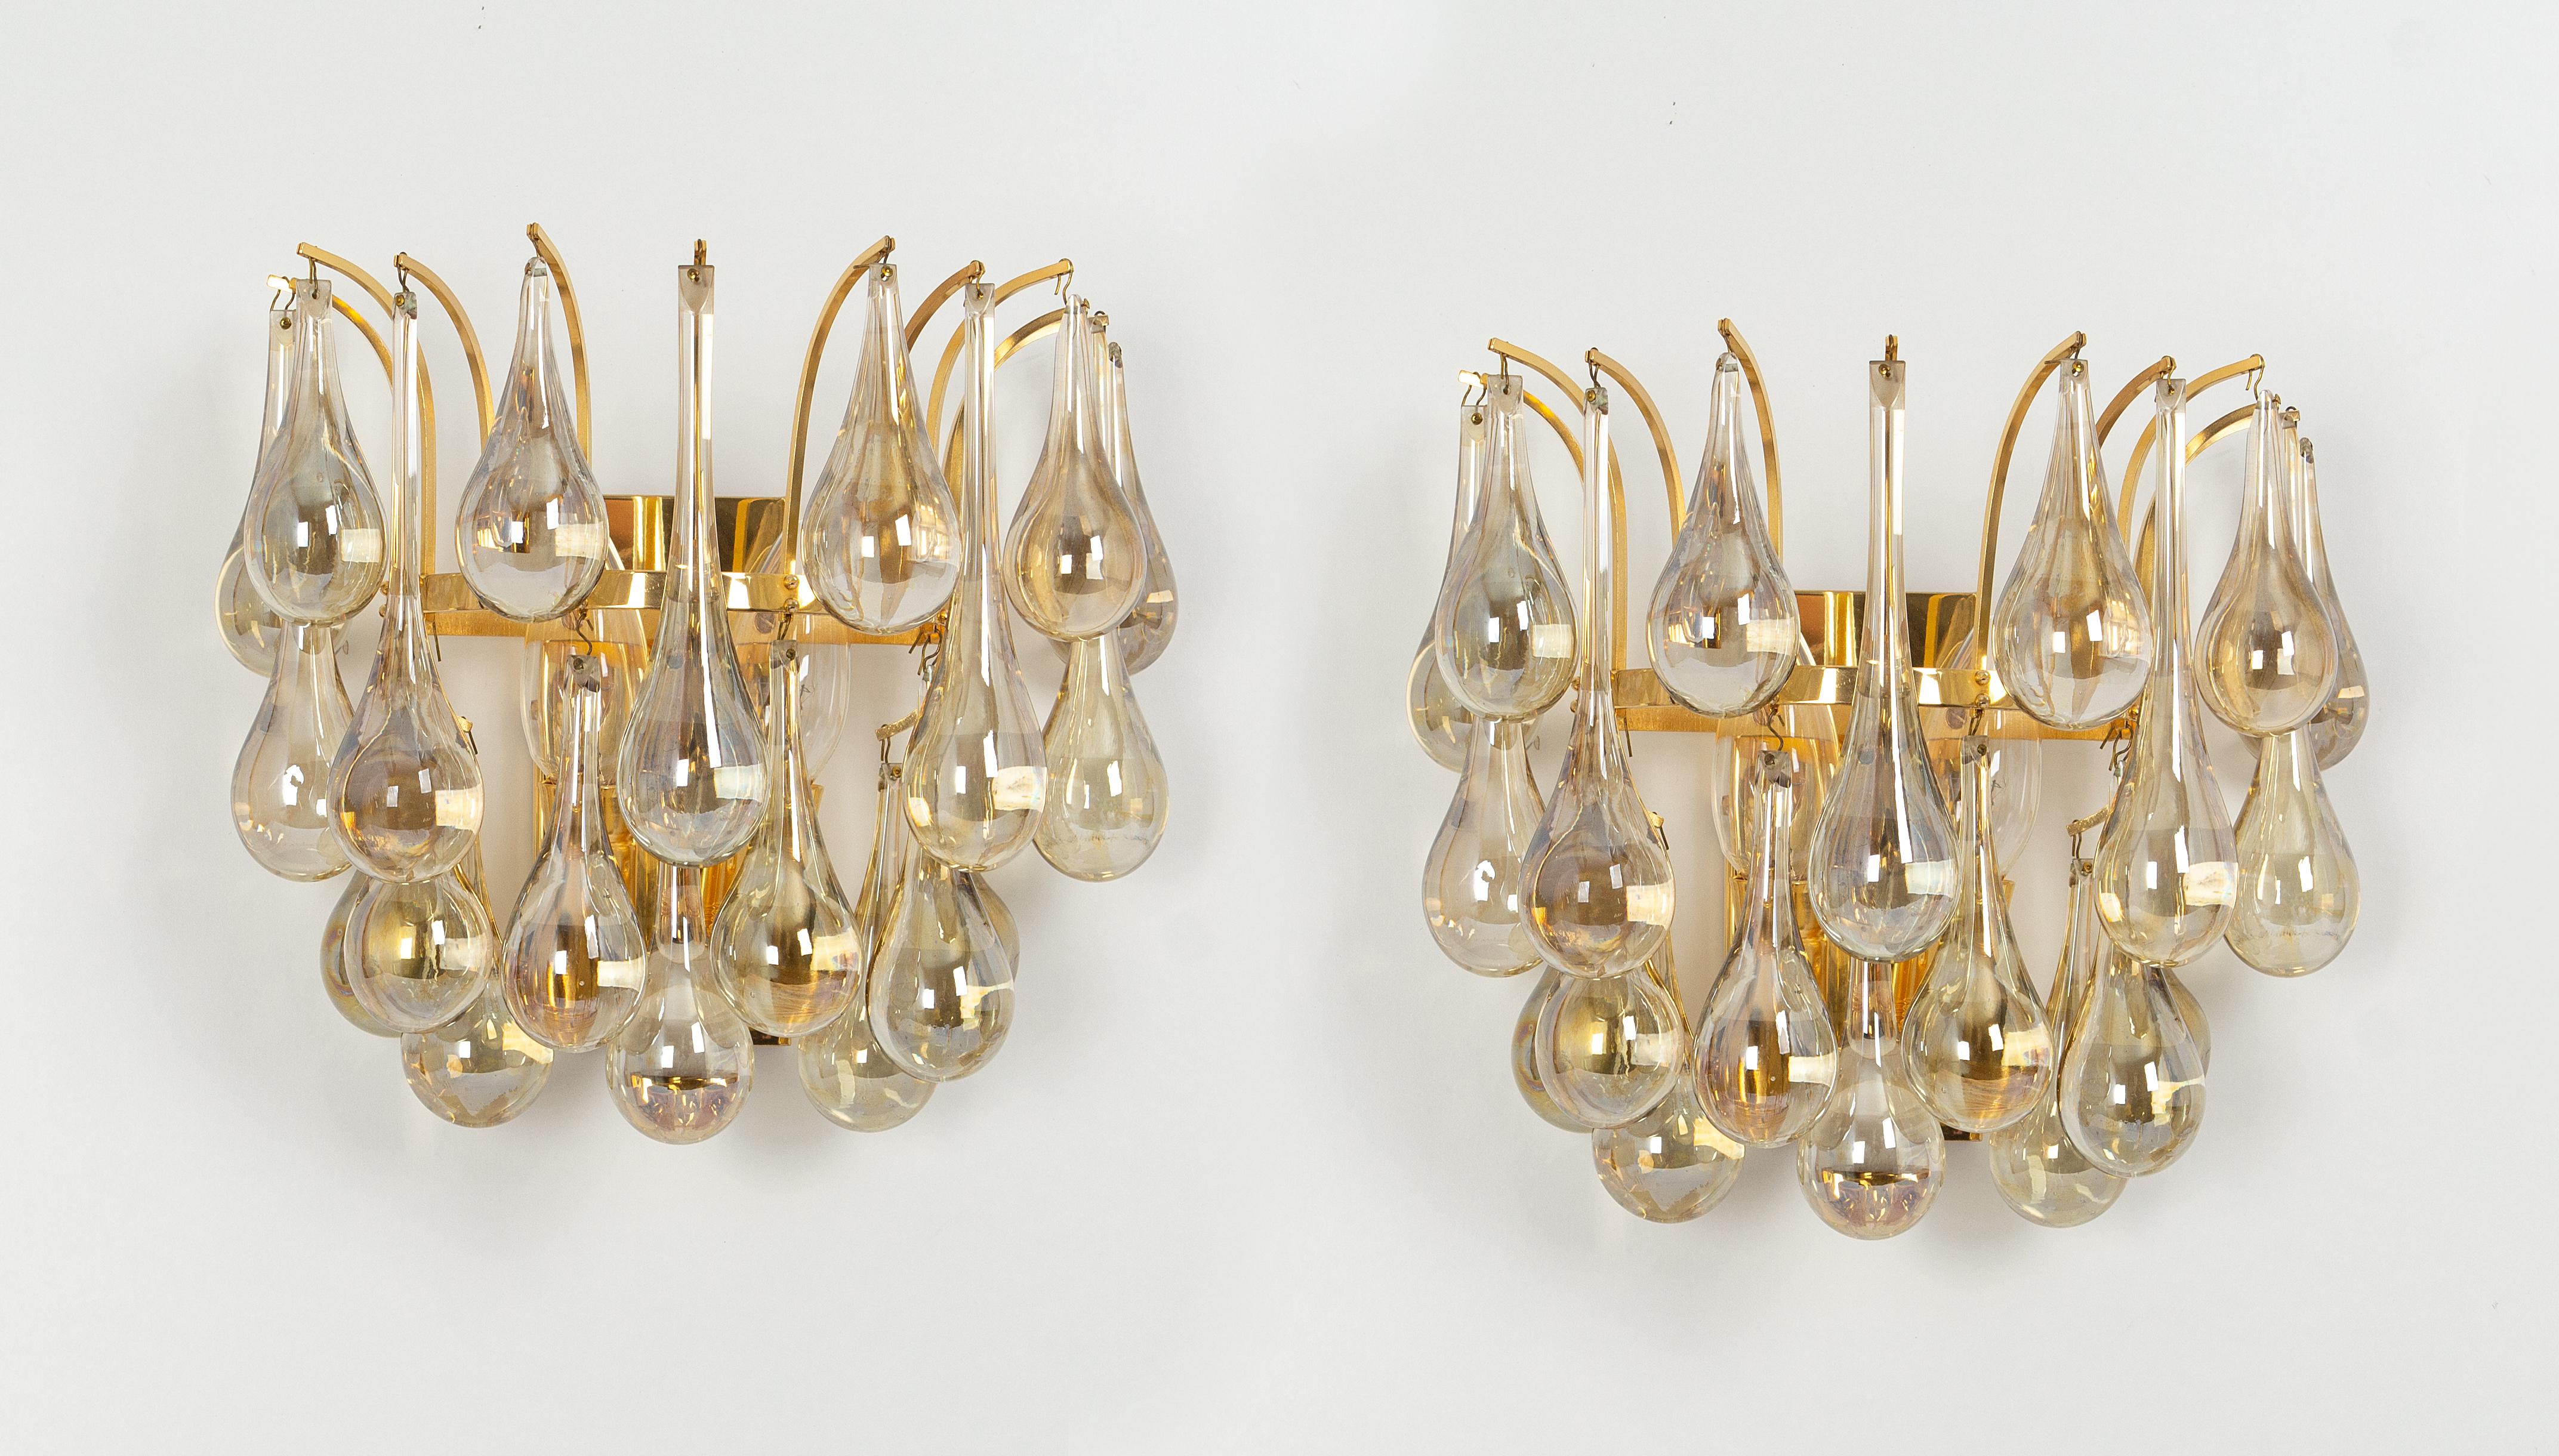 Large Pair of Golden Gilded Brass and Crystal Sconces by C.Palme, Germany, 1970s For Sale 4